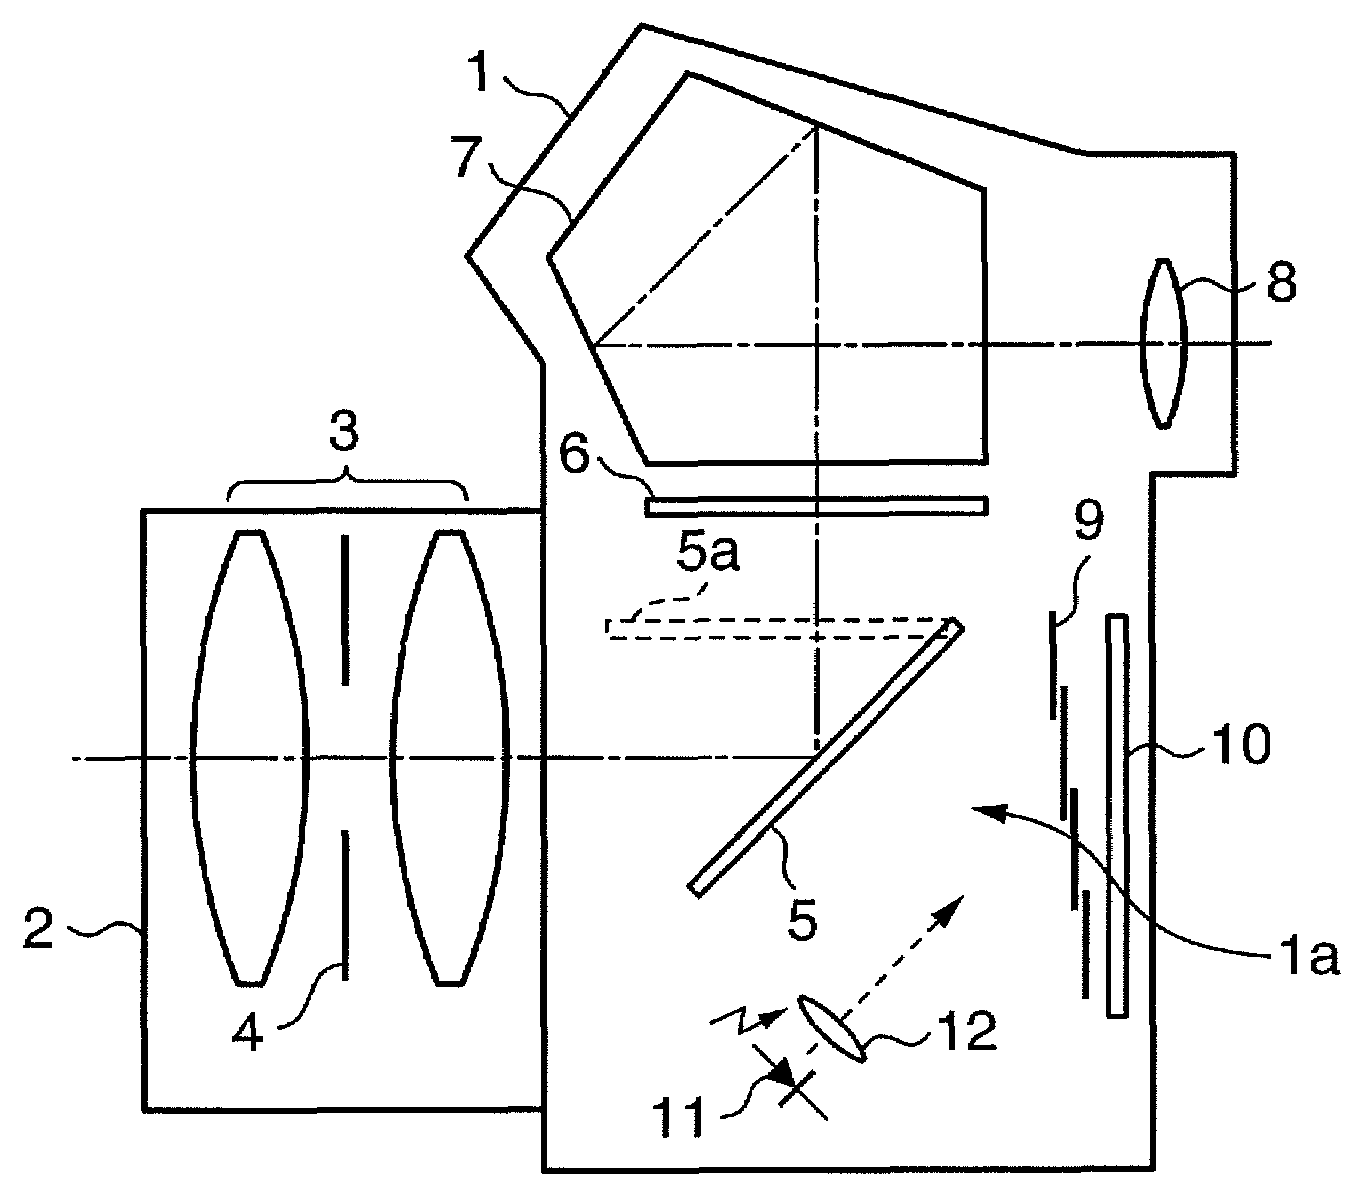 Camera with shutter speed detection and correction